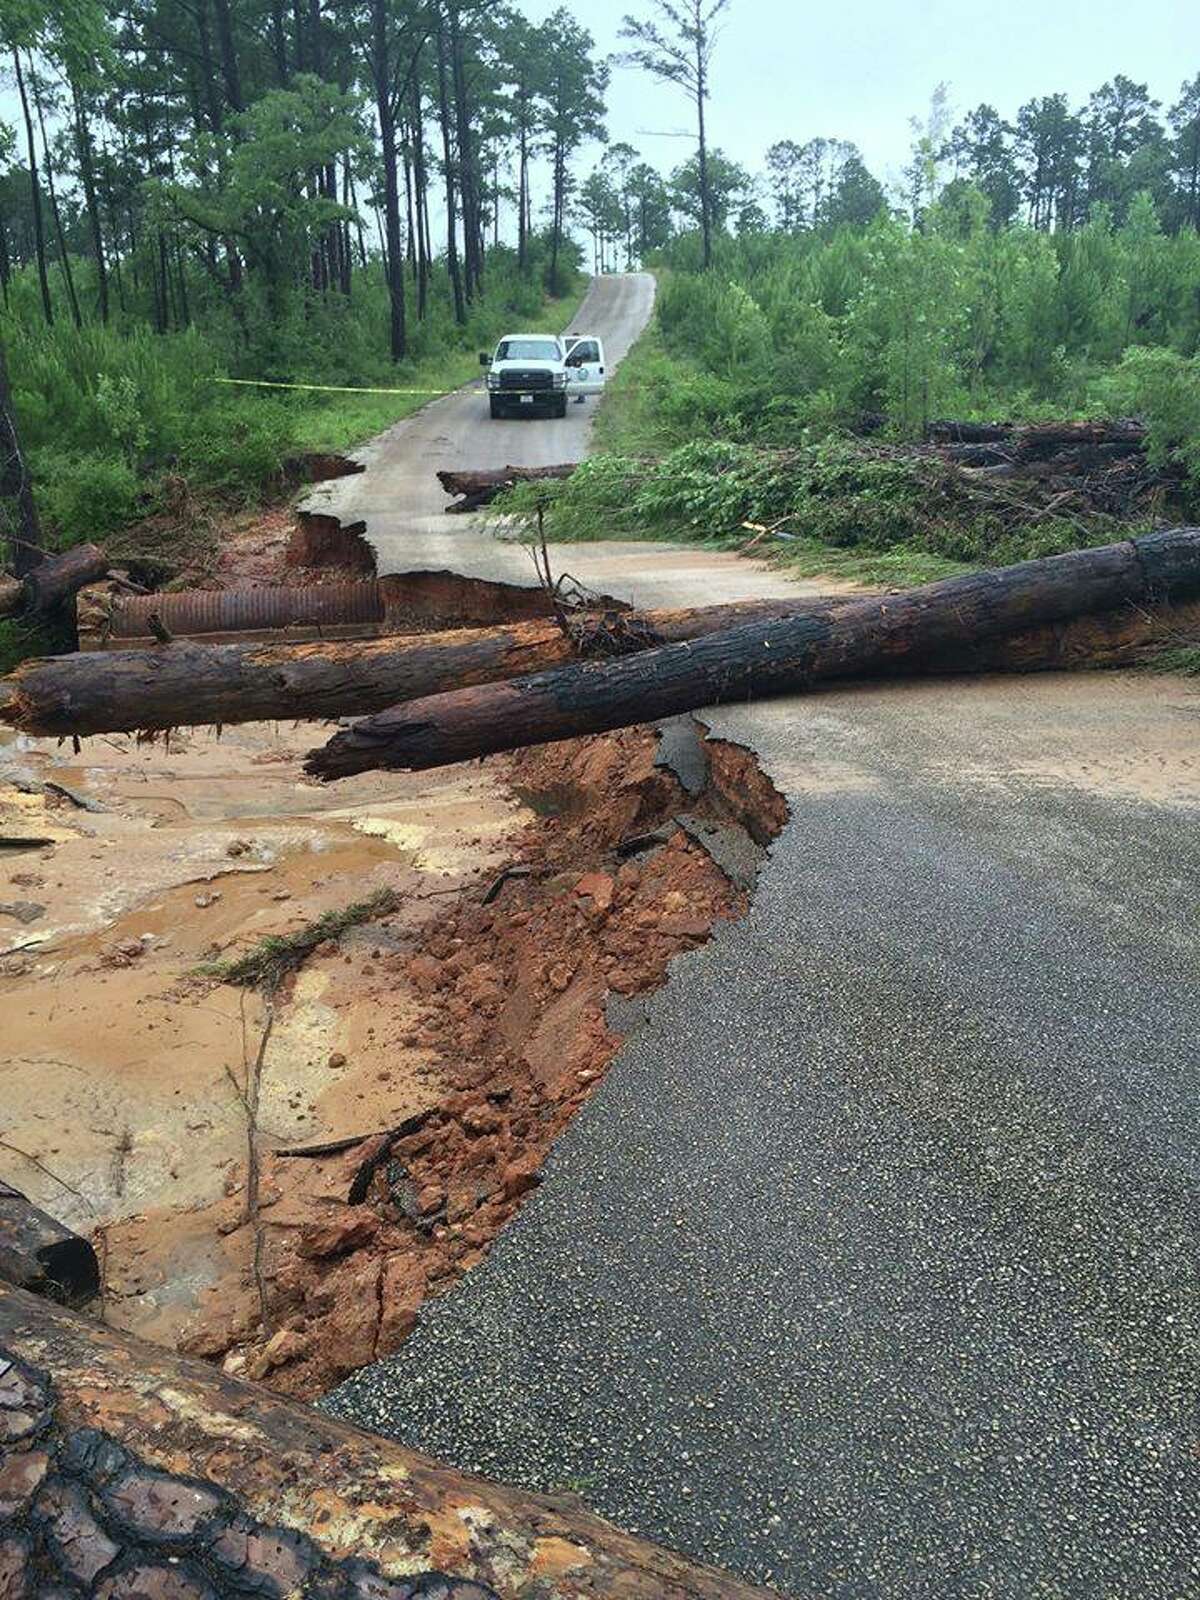 Flood damage on the park road between Bastrop and Buescher State Parks. The parks are open, though some areas are closed due to flood damage. Park Road 1C is closed.